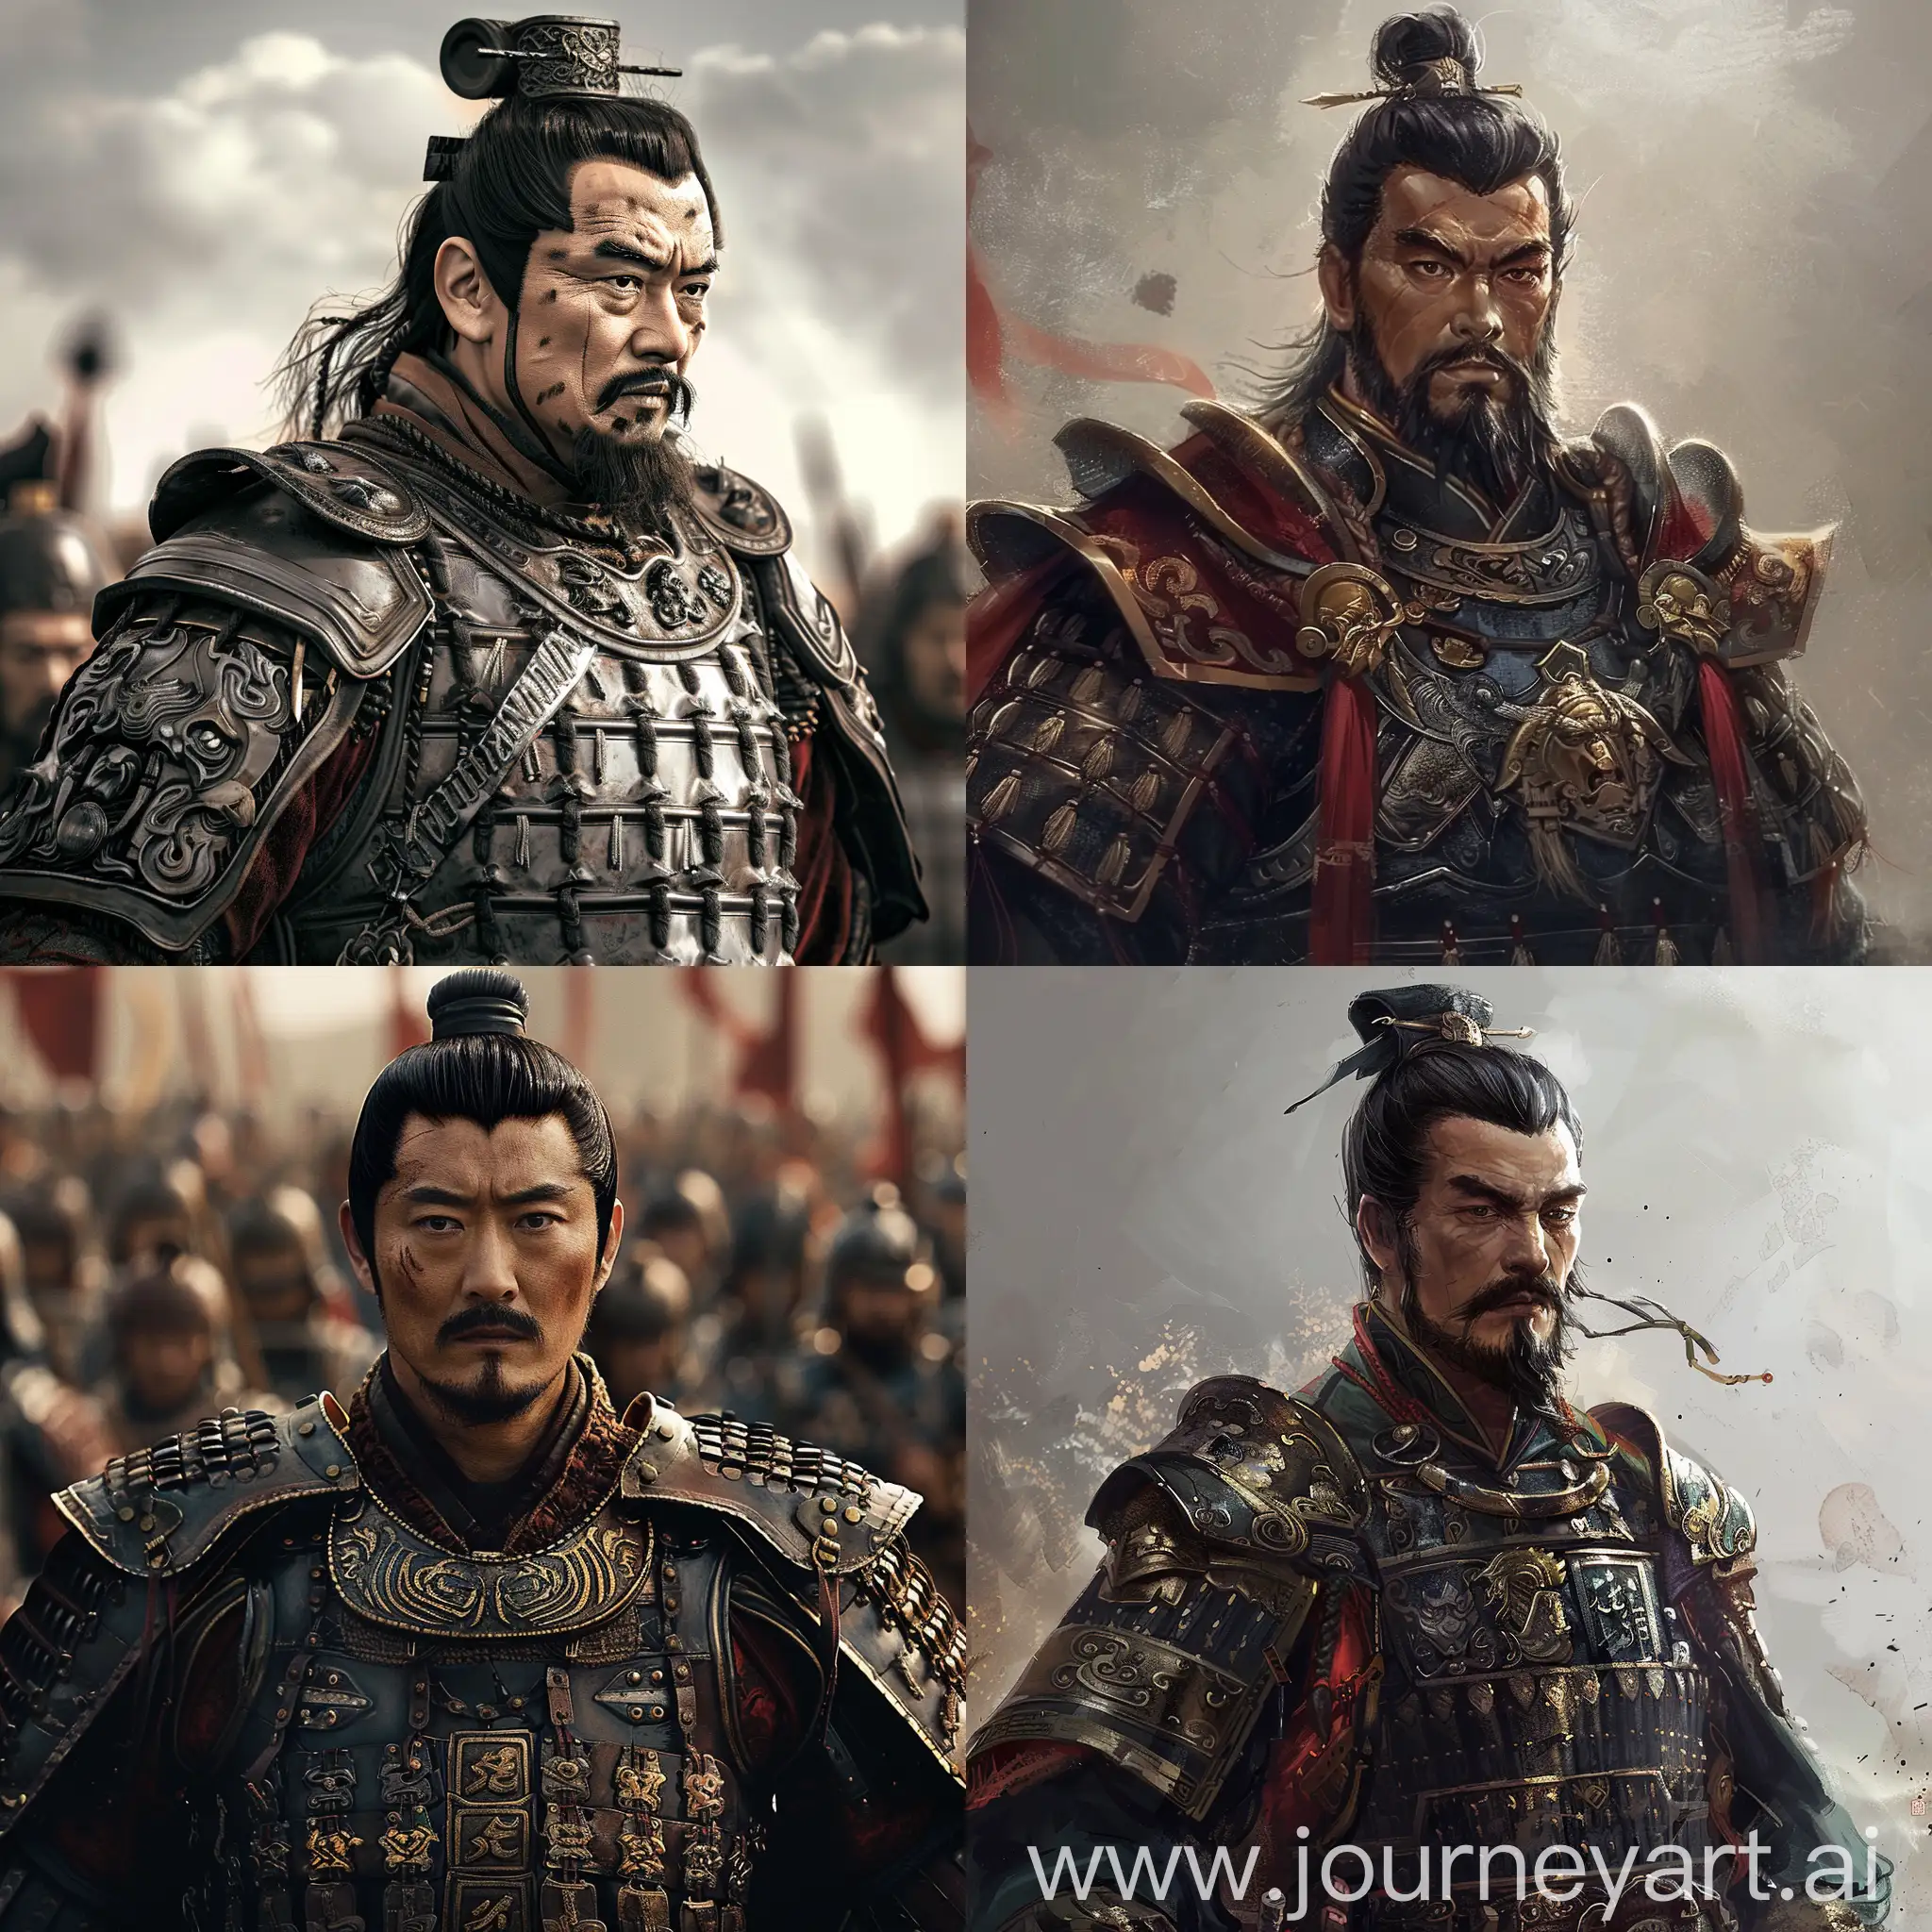 du Yu, 3 kingdom jin dynasty. A powerful military commander clad in ancient battle armor, exuding an imposing presence with a resolute countenance that reflects his leadership qualities